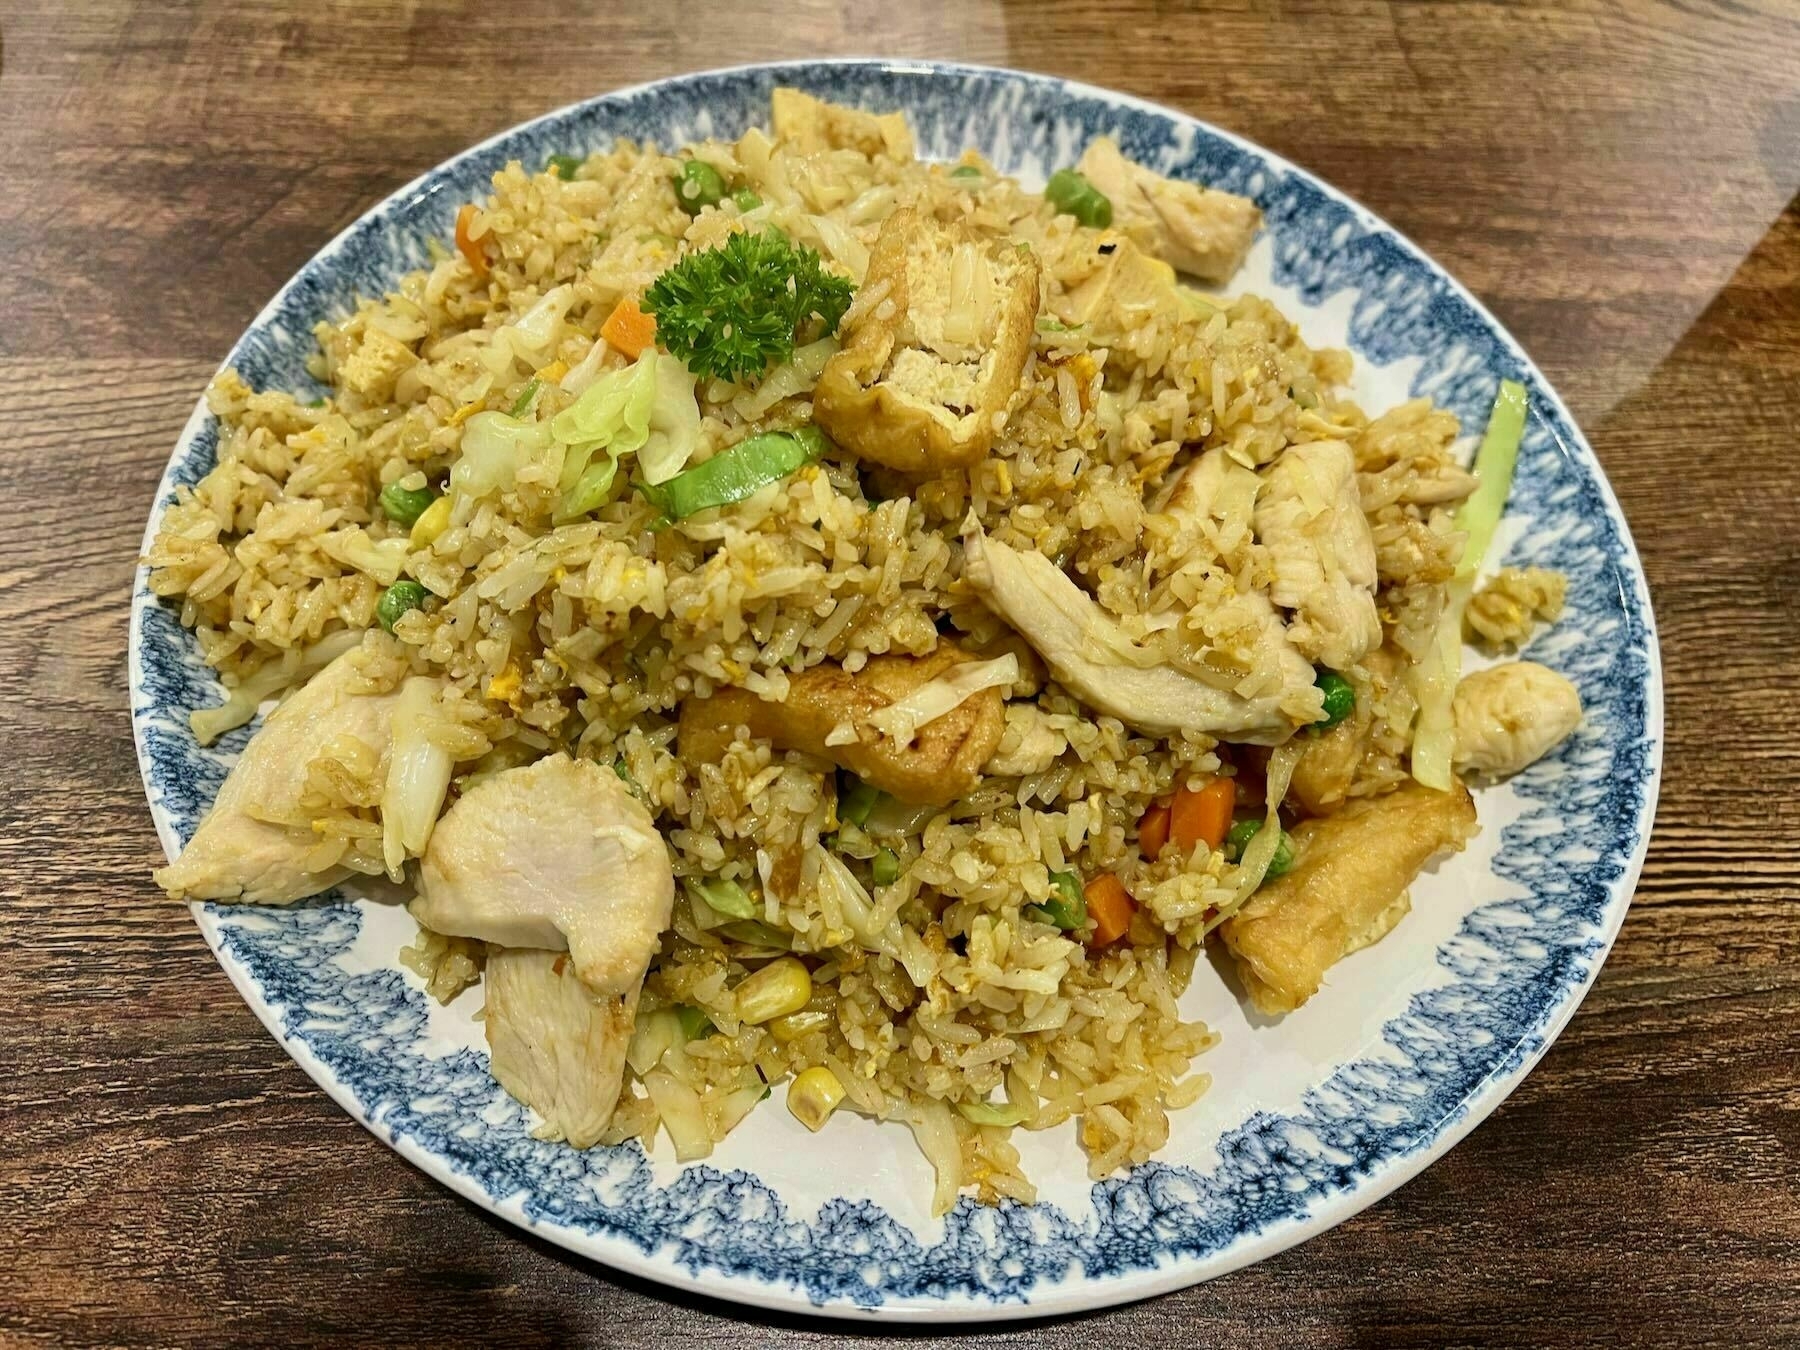 A large plate of rice with vegetables, chicken and tofu.  